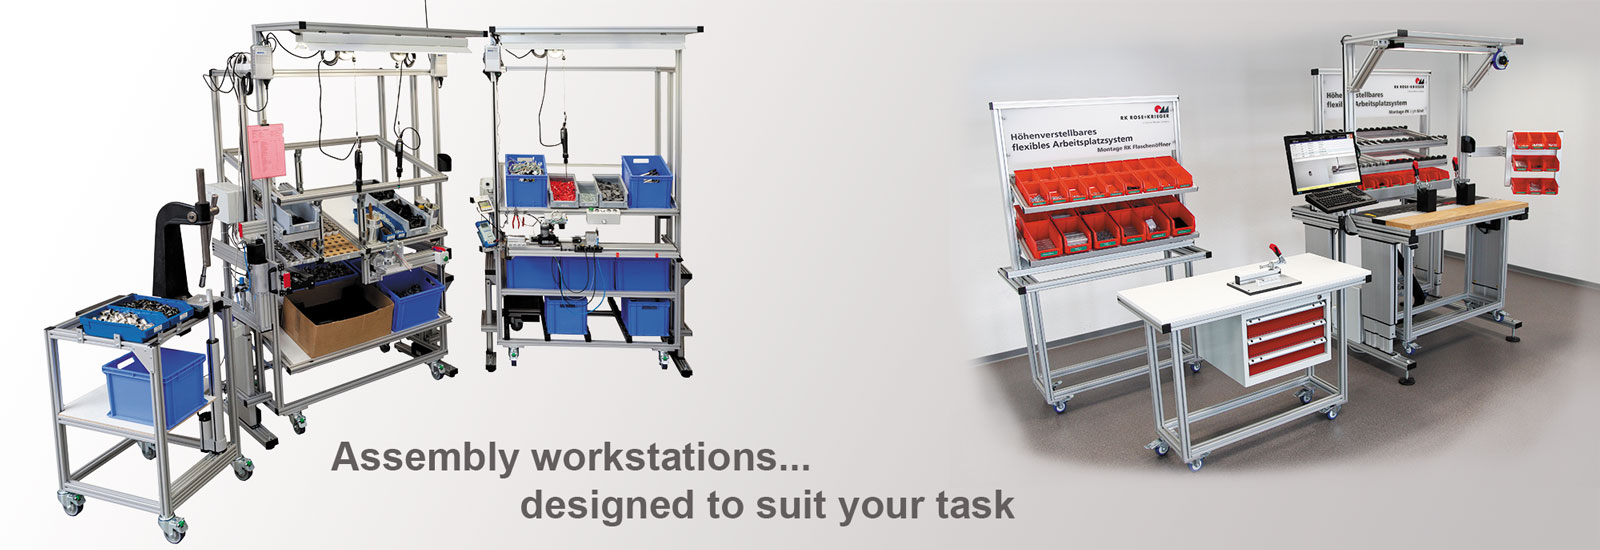 Ergonomically adaptable (height adjustable) standing/sitting workstations